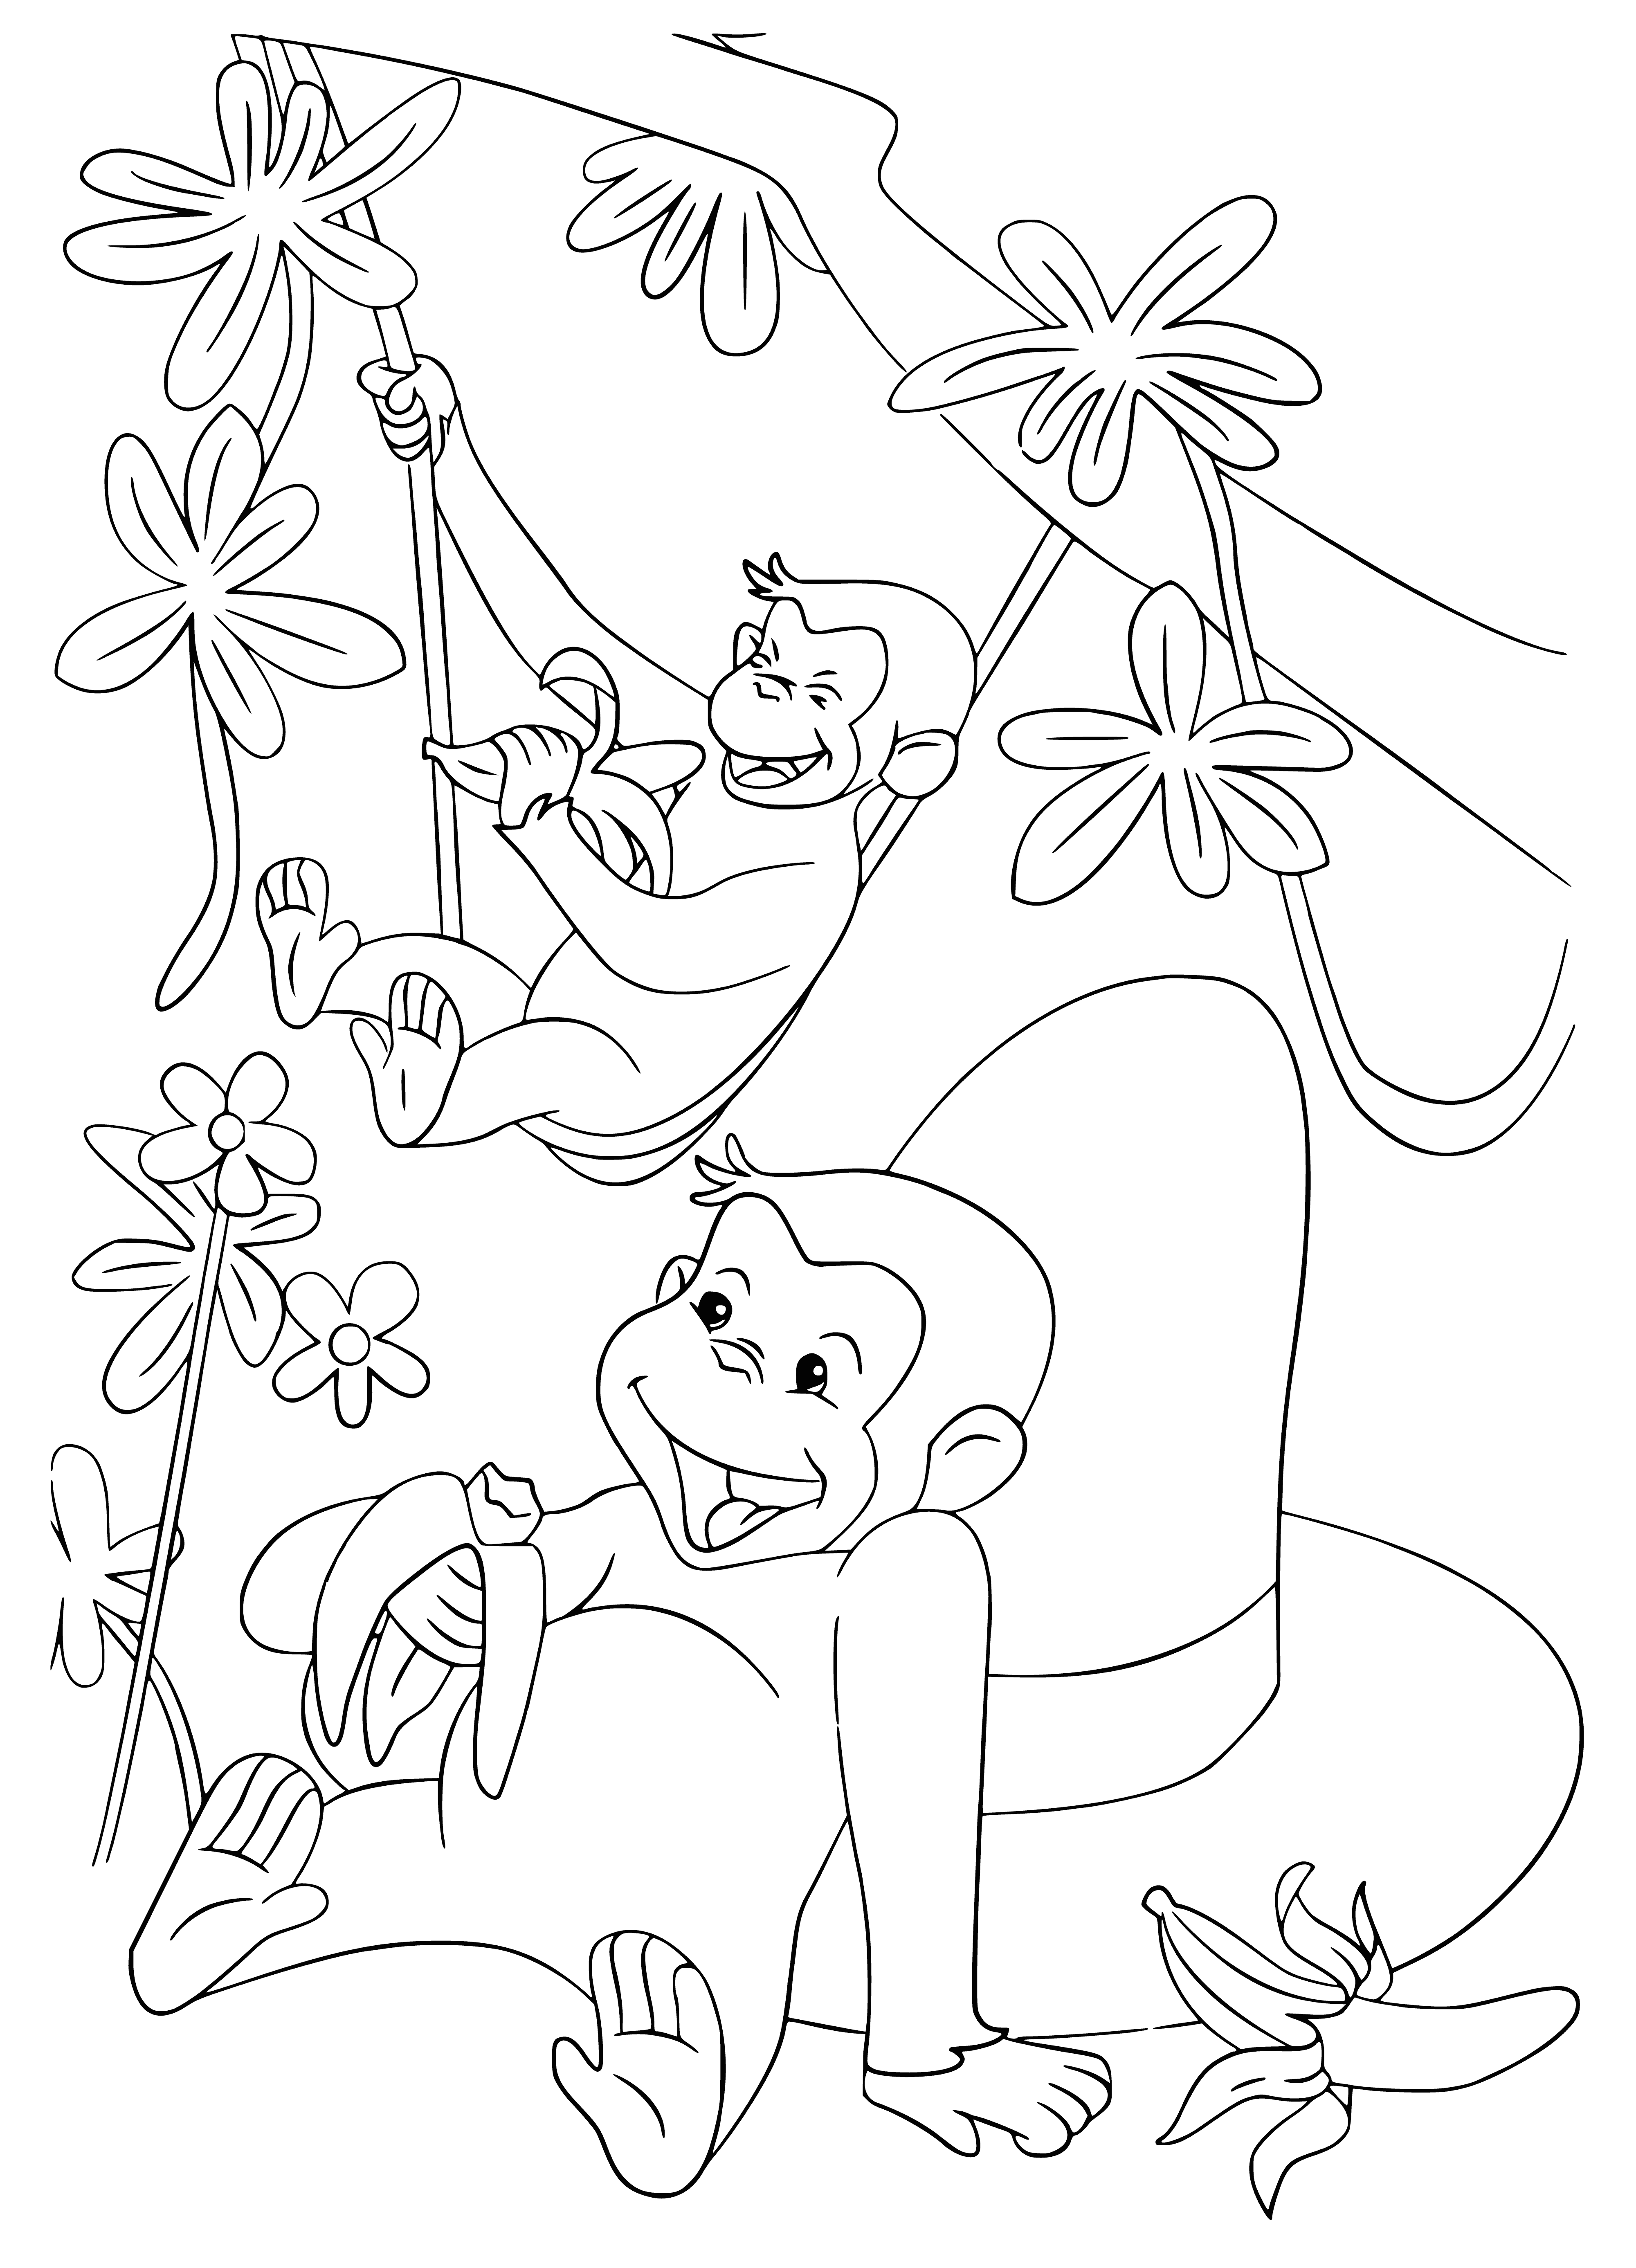 coloring page: 4 monkeys: 2 on ground, 2 on tree branch, looking at each other & up/down.